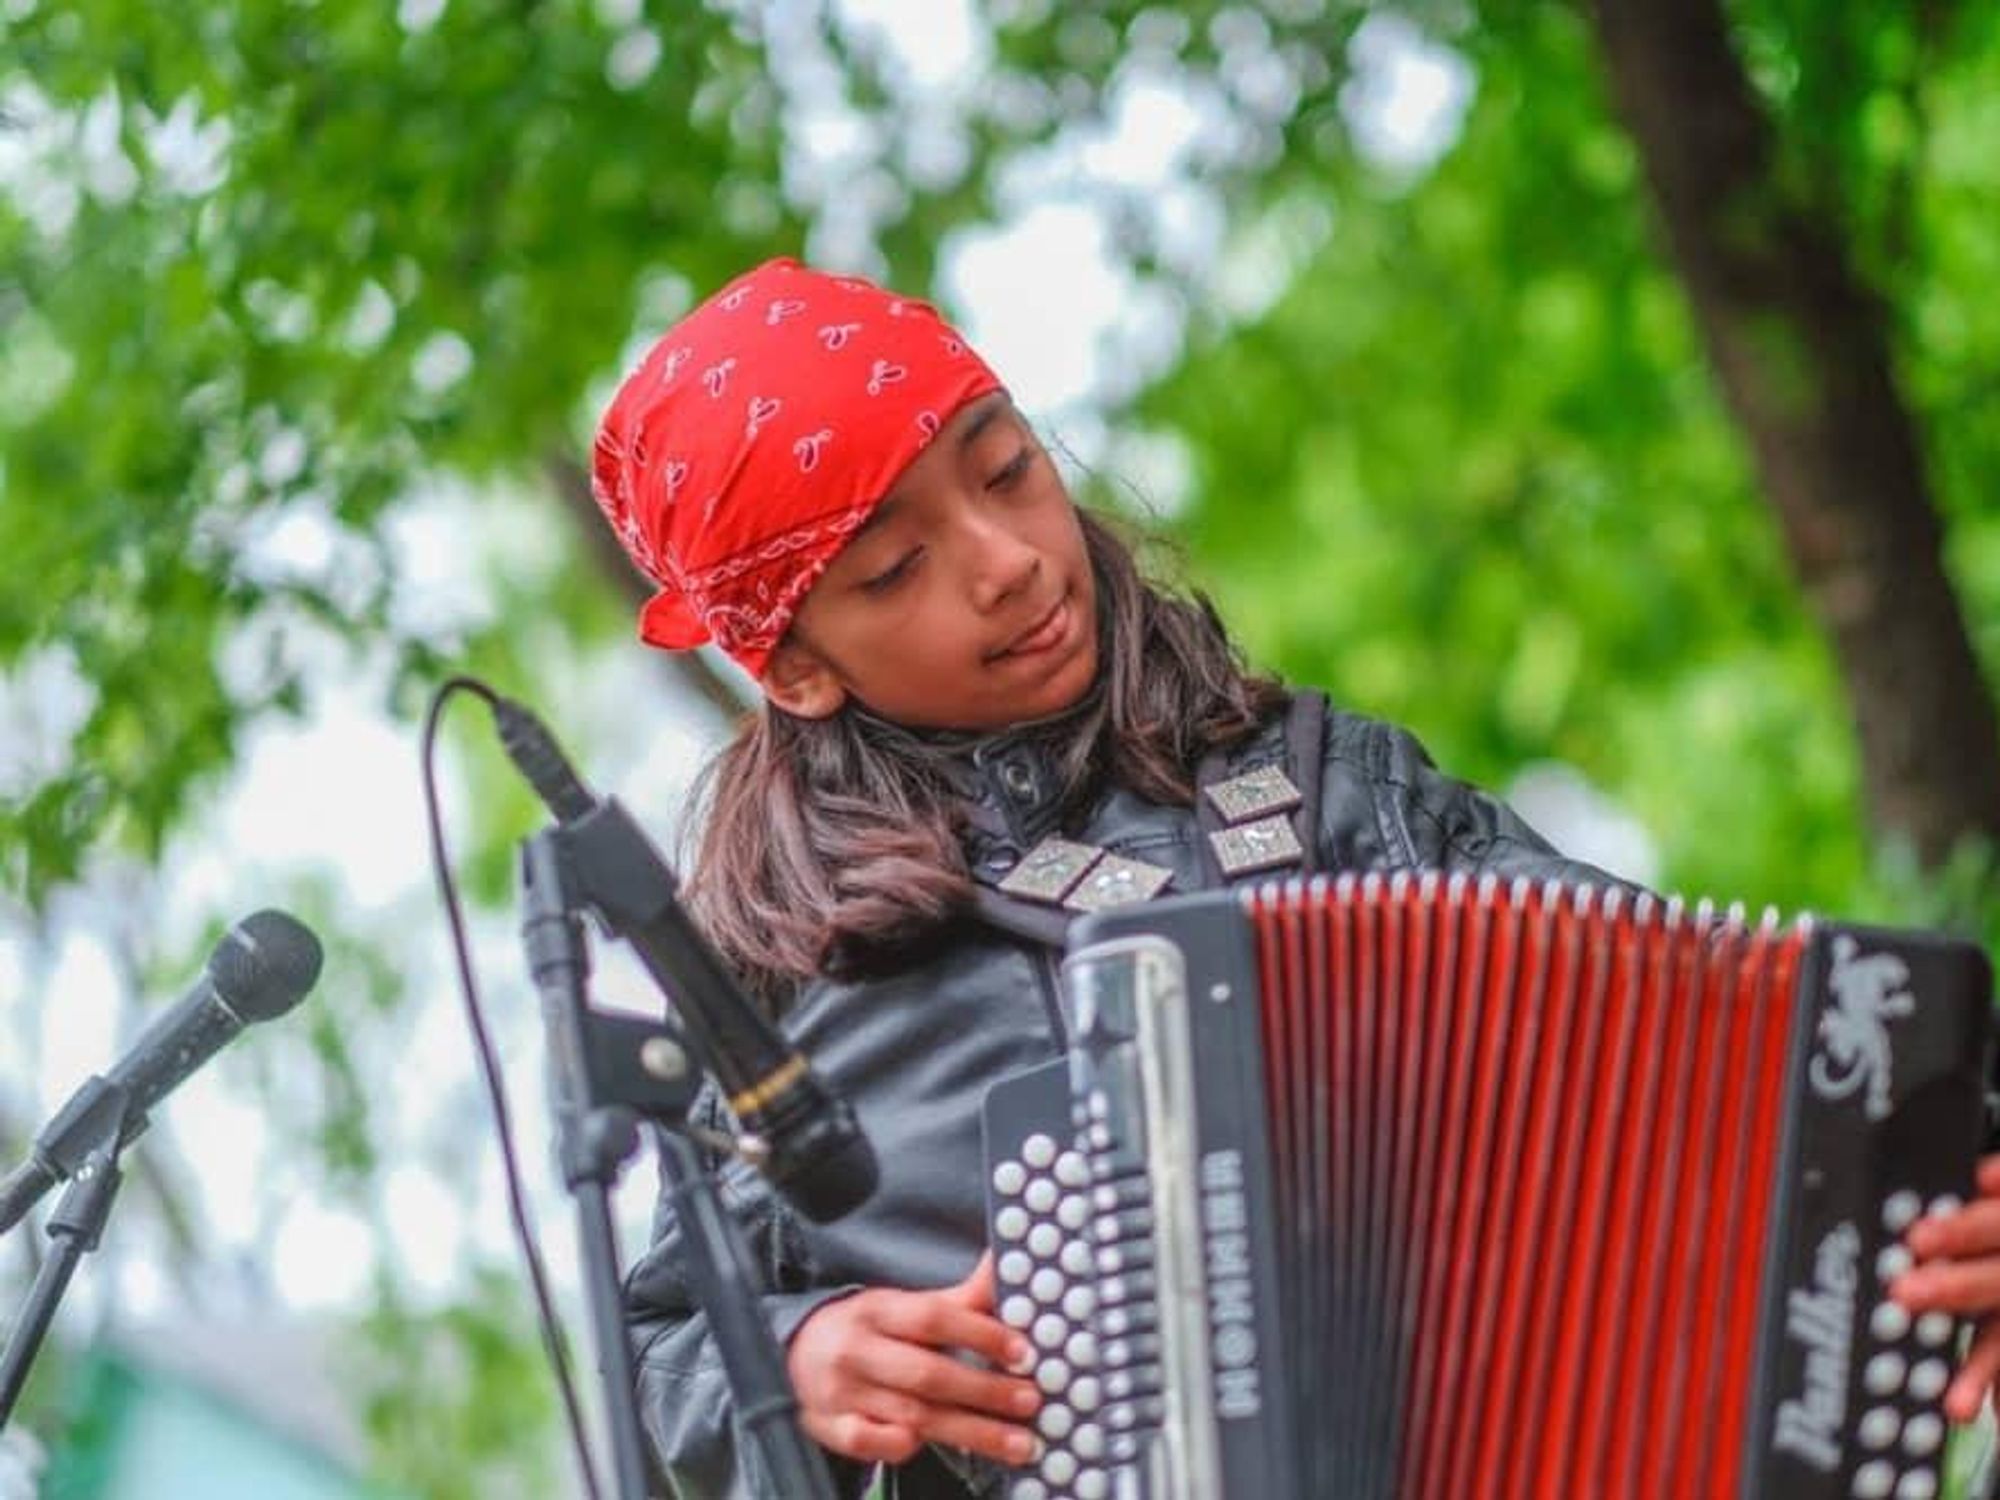 Events such as Paseo por El Westside teach children the power of preservation through traditional music.